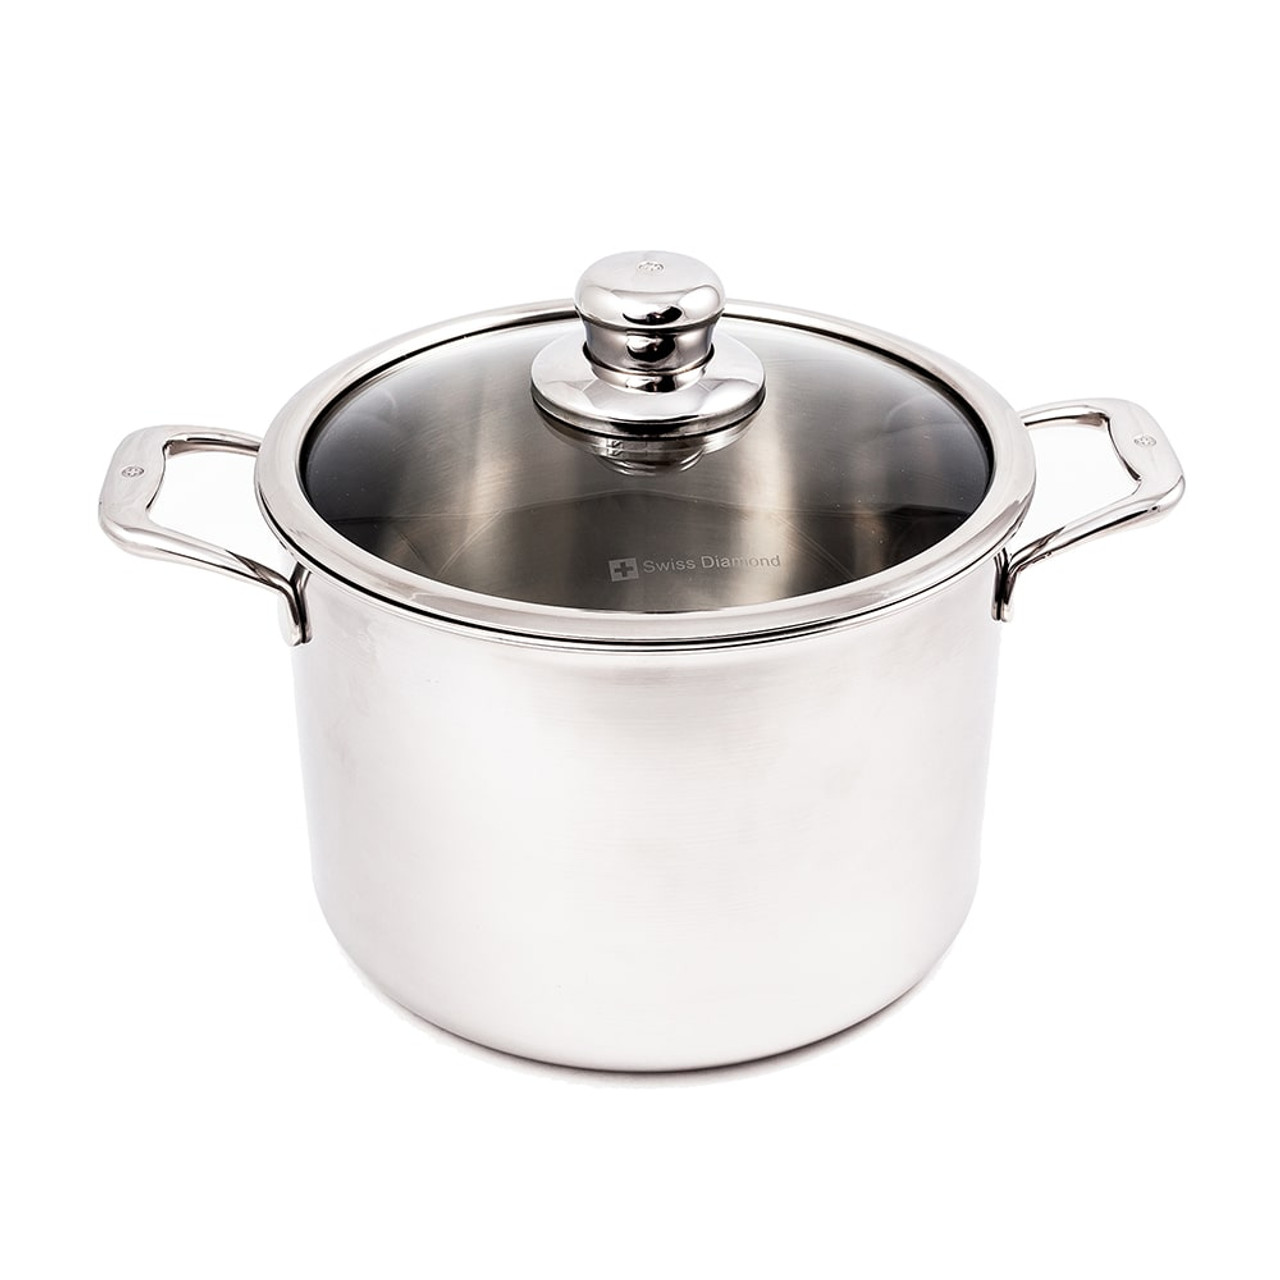 Gourmet Chef 10-Quart Stainless Steel Stock Pot with Glass Lid